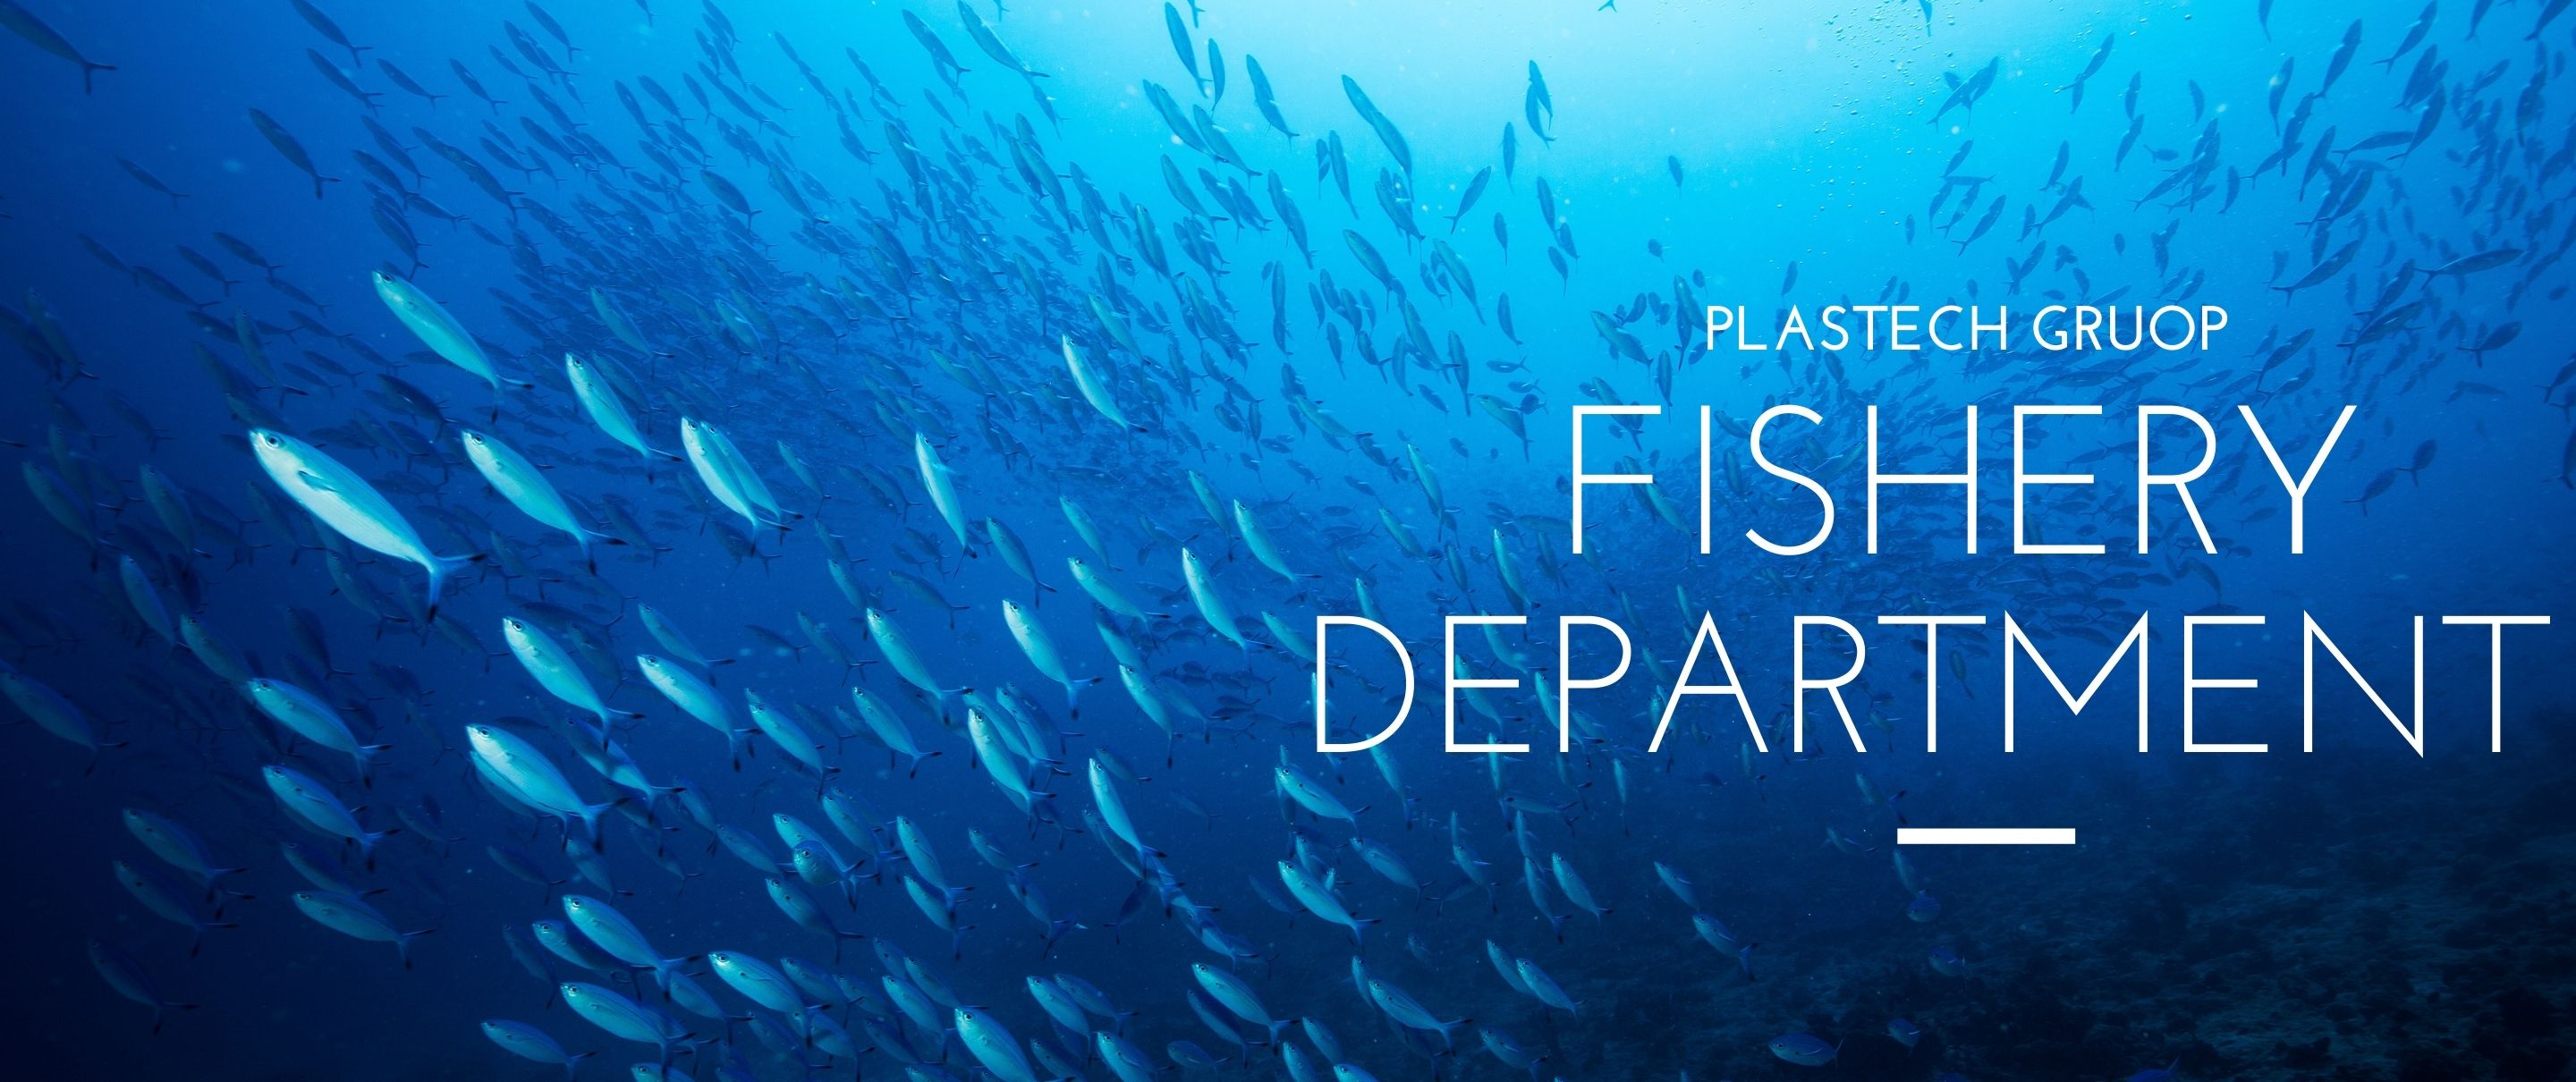 PLASTECH GROUP - FISHERY DEPARTMENT